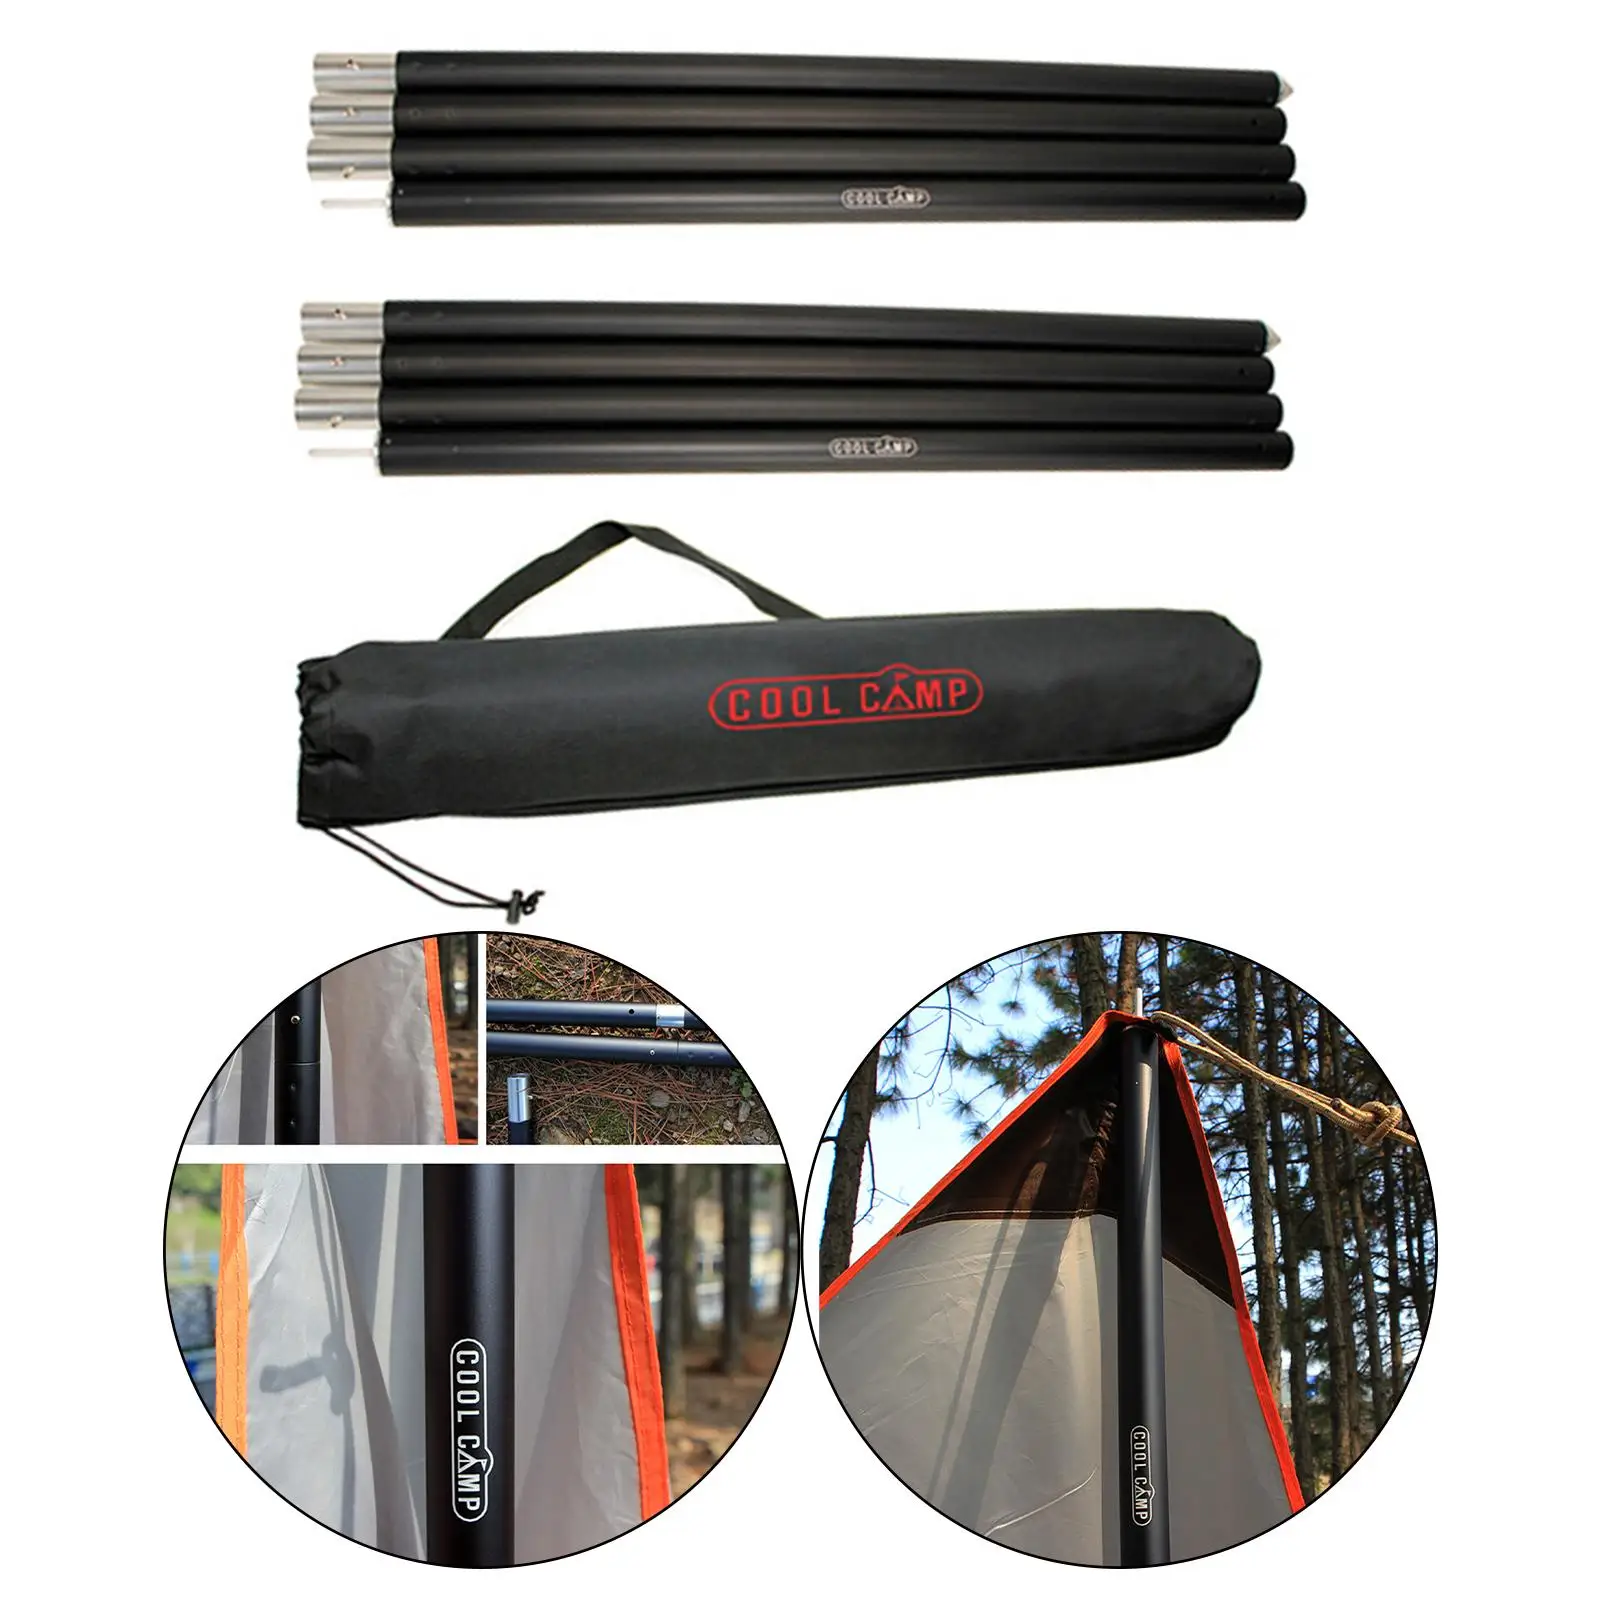 280cm Aluminum Tent Tarp Rod Assembled  for Camping, Awnings,Shelters Versatile Collapsible Easy to Install Multifunction